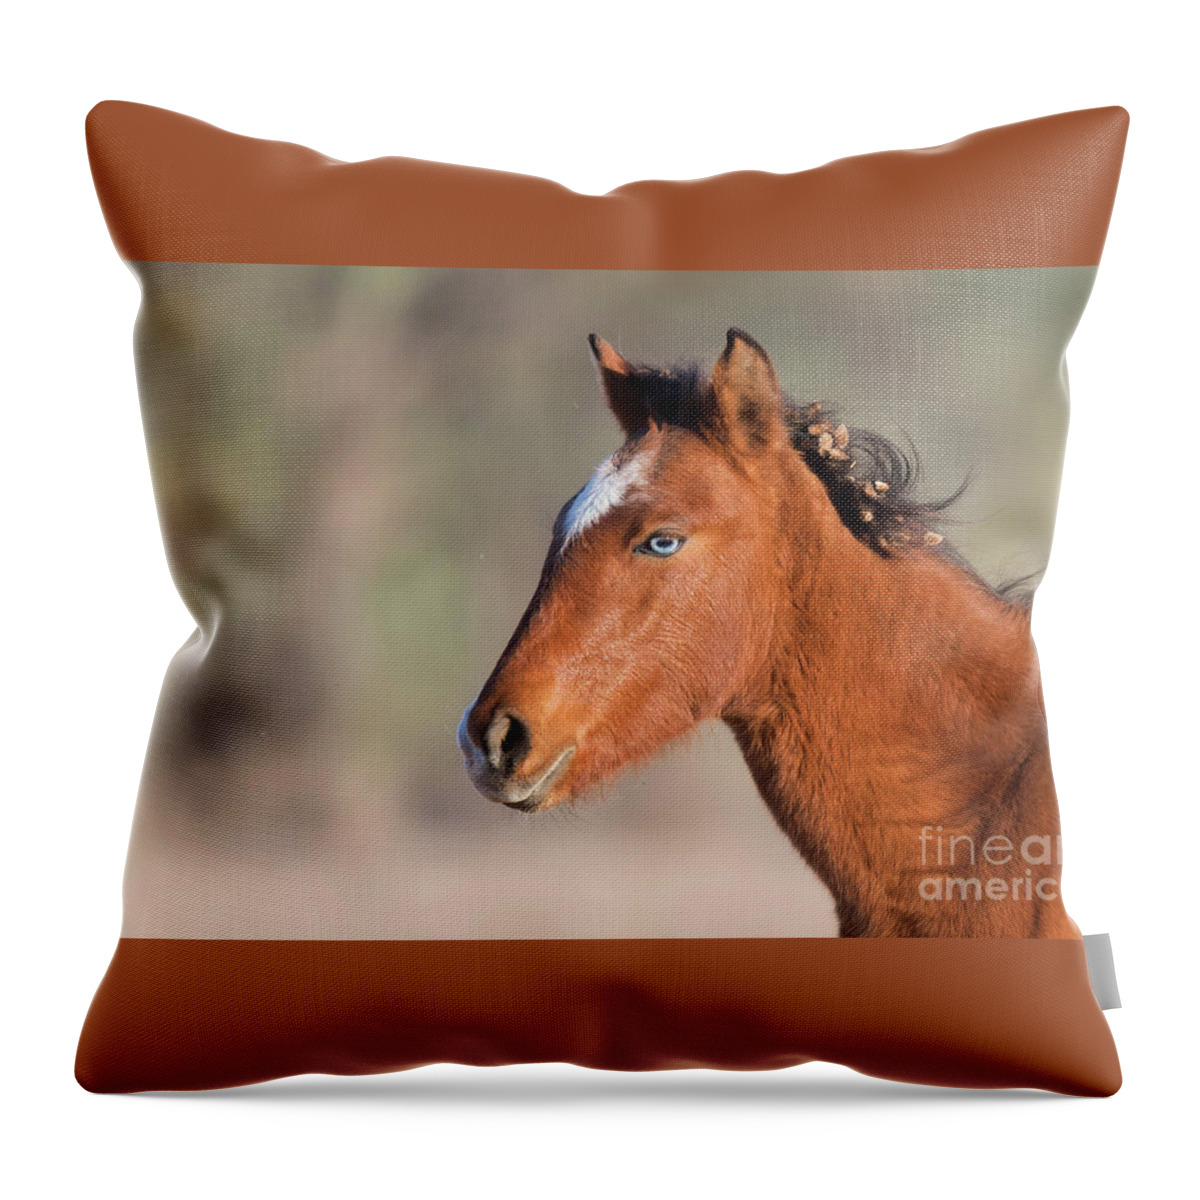 Blue Eye Throw Pillow featuring the photograph Wild Portrait by Shannon Hastings